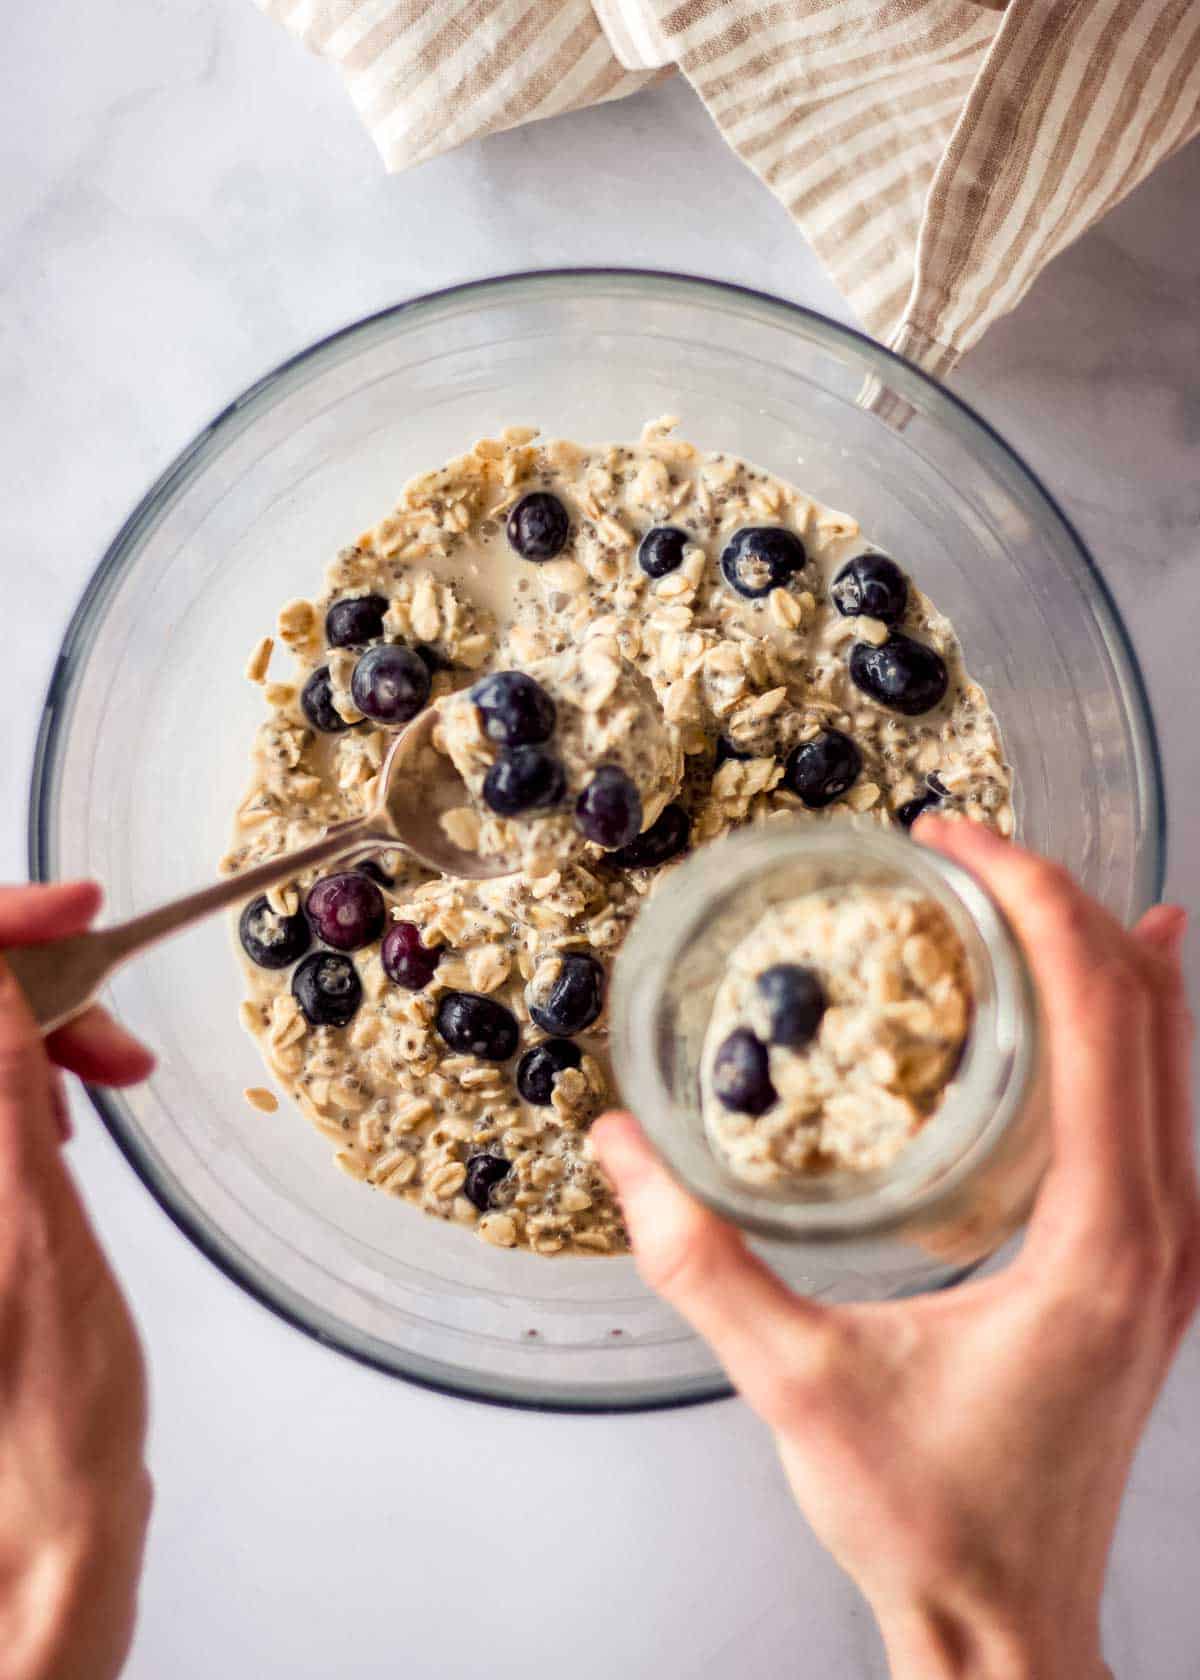 A woman's hands spoon overnight oats with blueberry from a large mixing bowl into a glass jar.